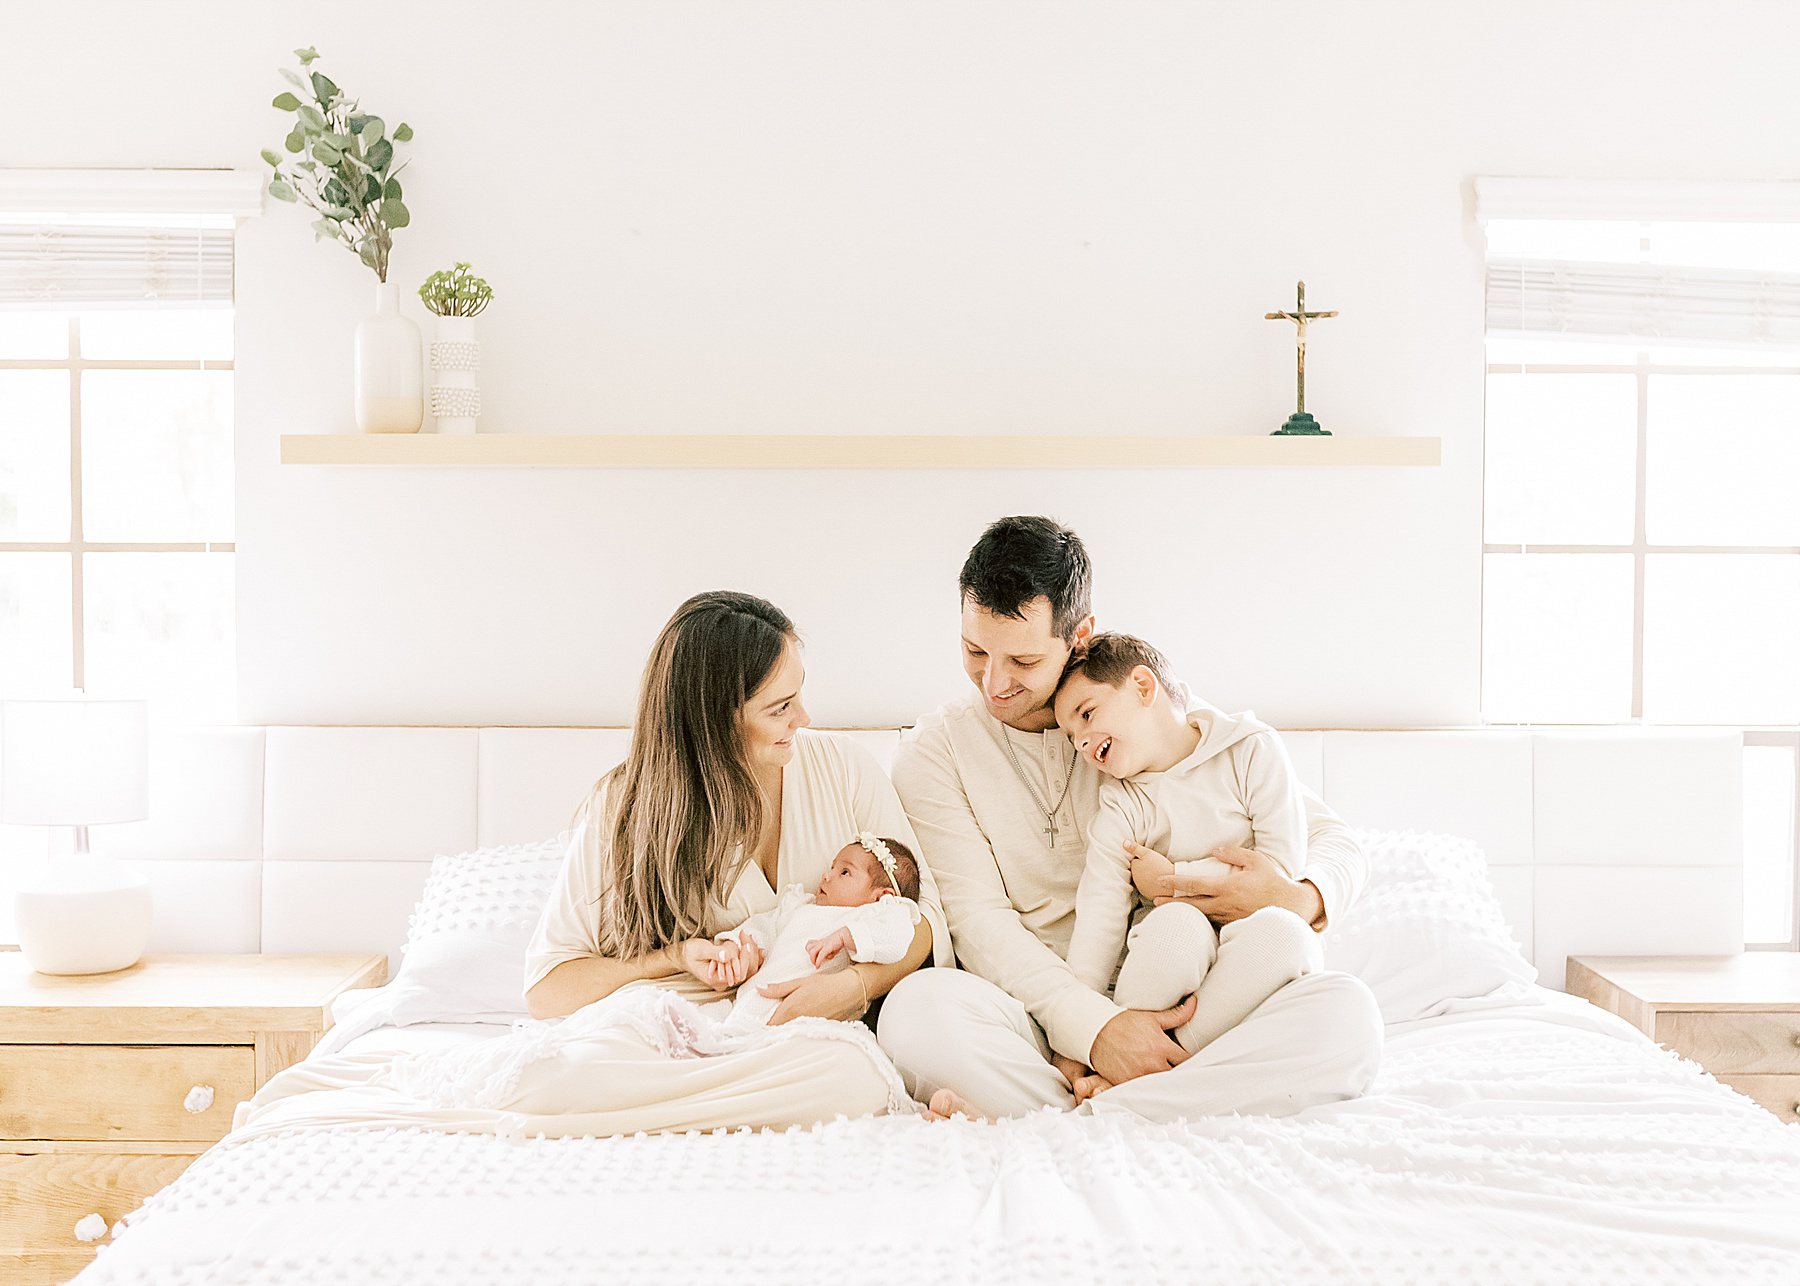 family dressed in tan and white sitting on bed with white comforter smiling at newborn baby